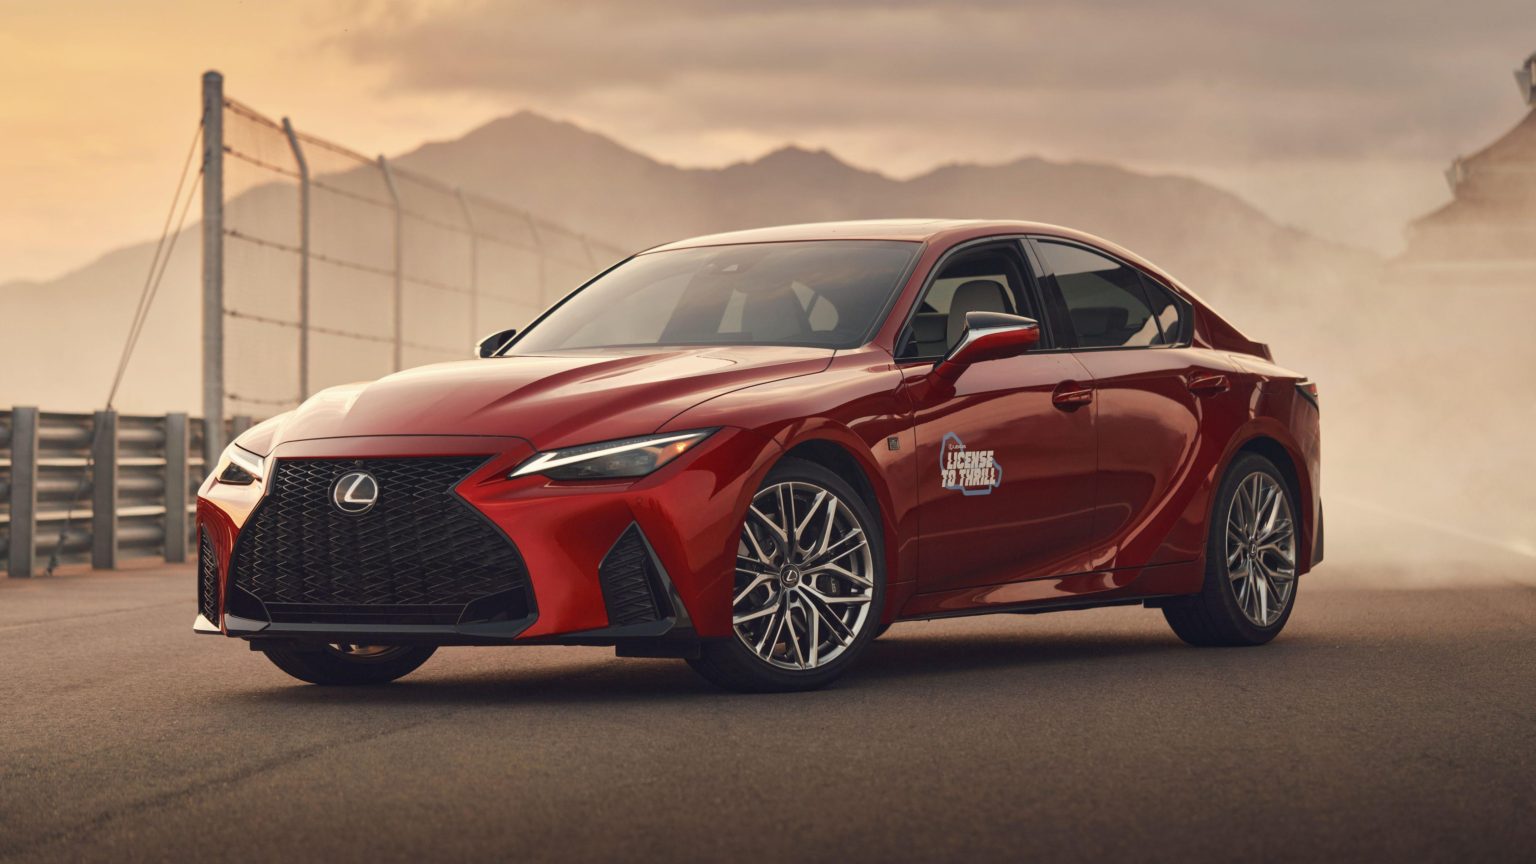 Lexus took a different approach to launch the new IS.